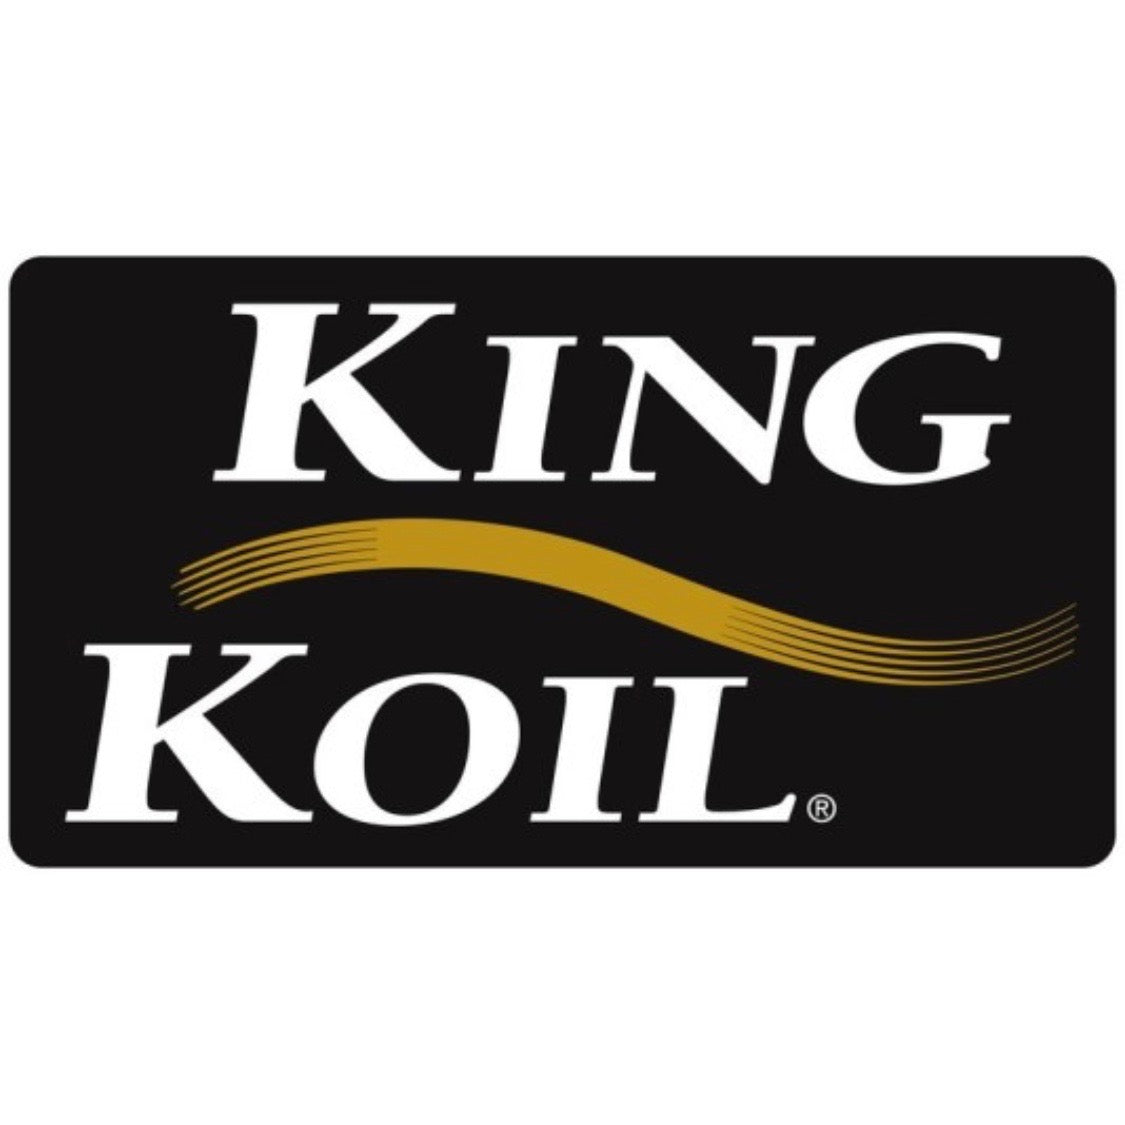 King Koil World Luxury™ Carmelo Flippable 2-Sided TightTop Mattress